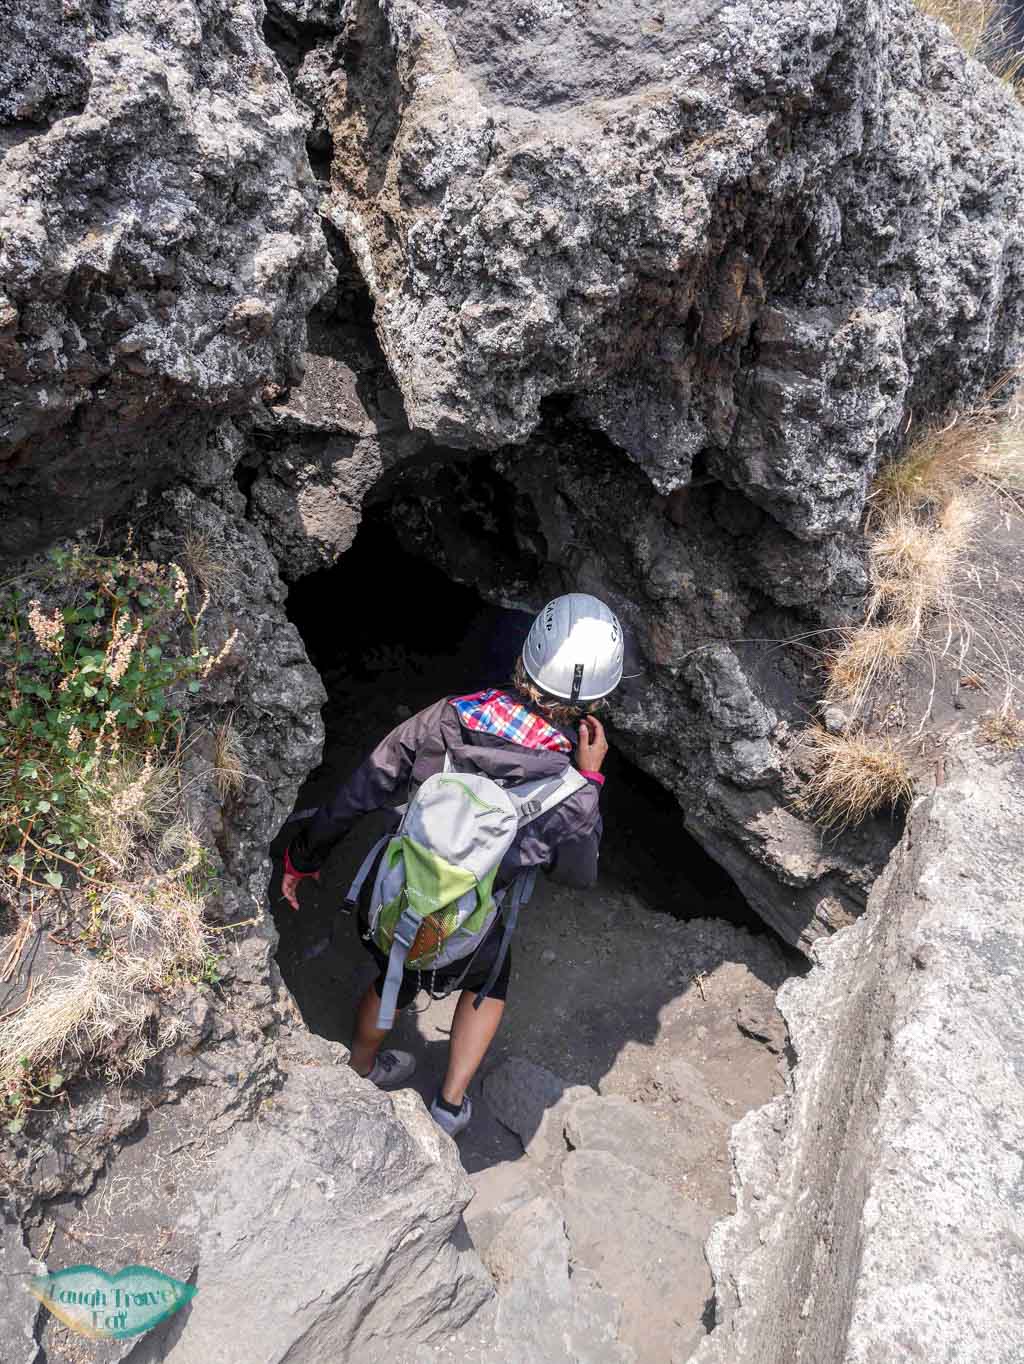 Heading into a lava tube cave on Mount Etna, armed with helmet and torch, Mount Etna, Catania, Sicily | Laugh Travel Eat